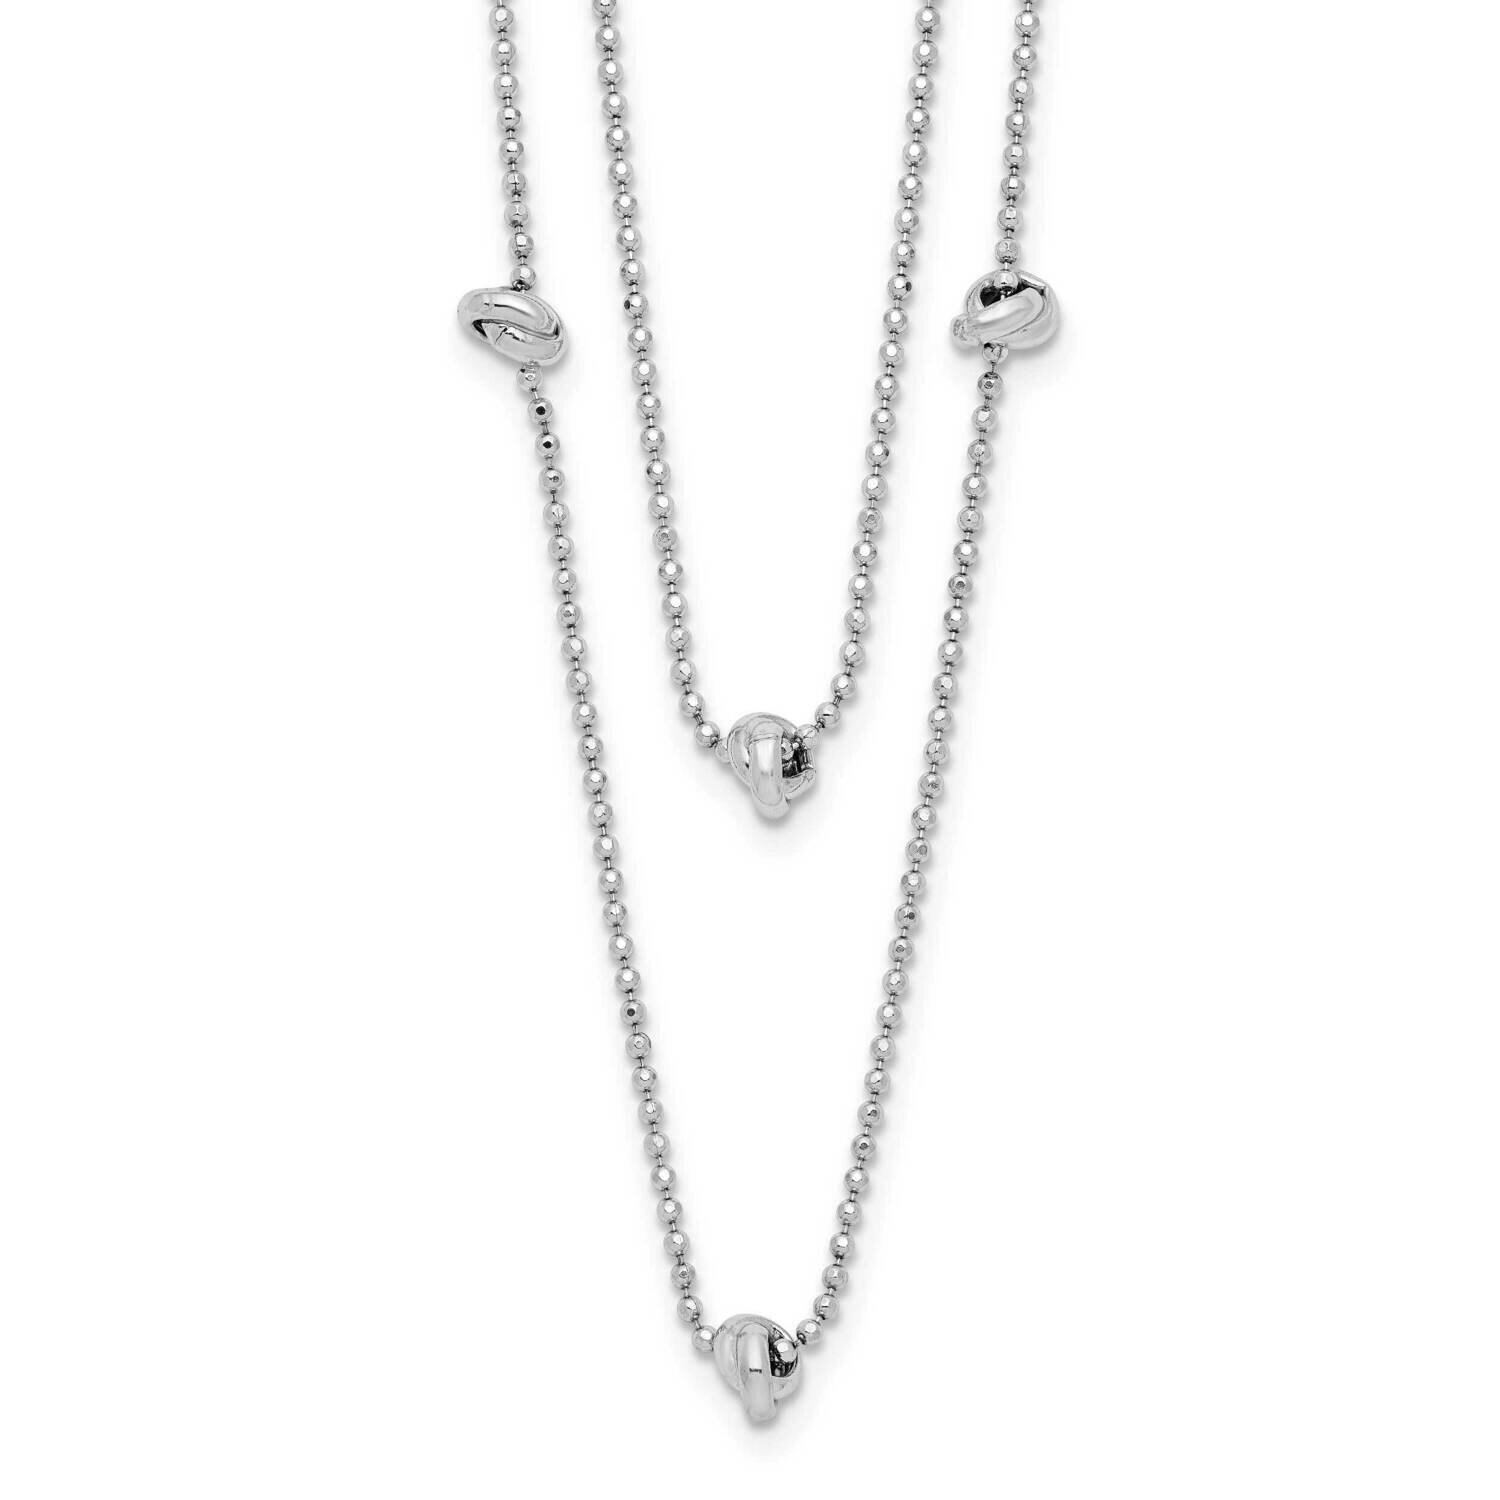 Polished Multi-Strand with 2 Inch Extension Necklace Sterling Silver Rhodium-Plated QG6003-16.75